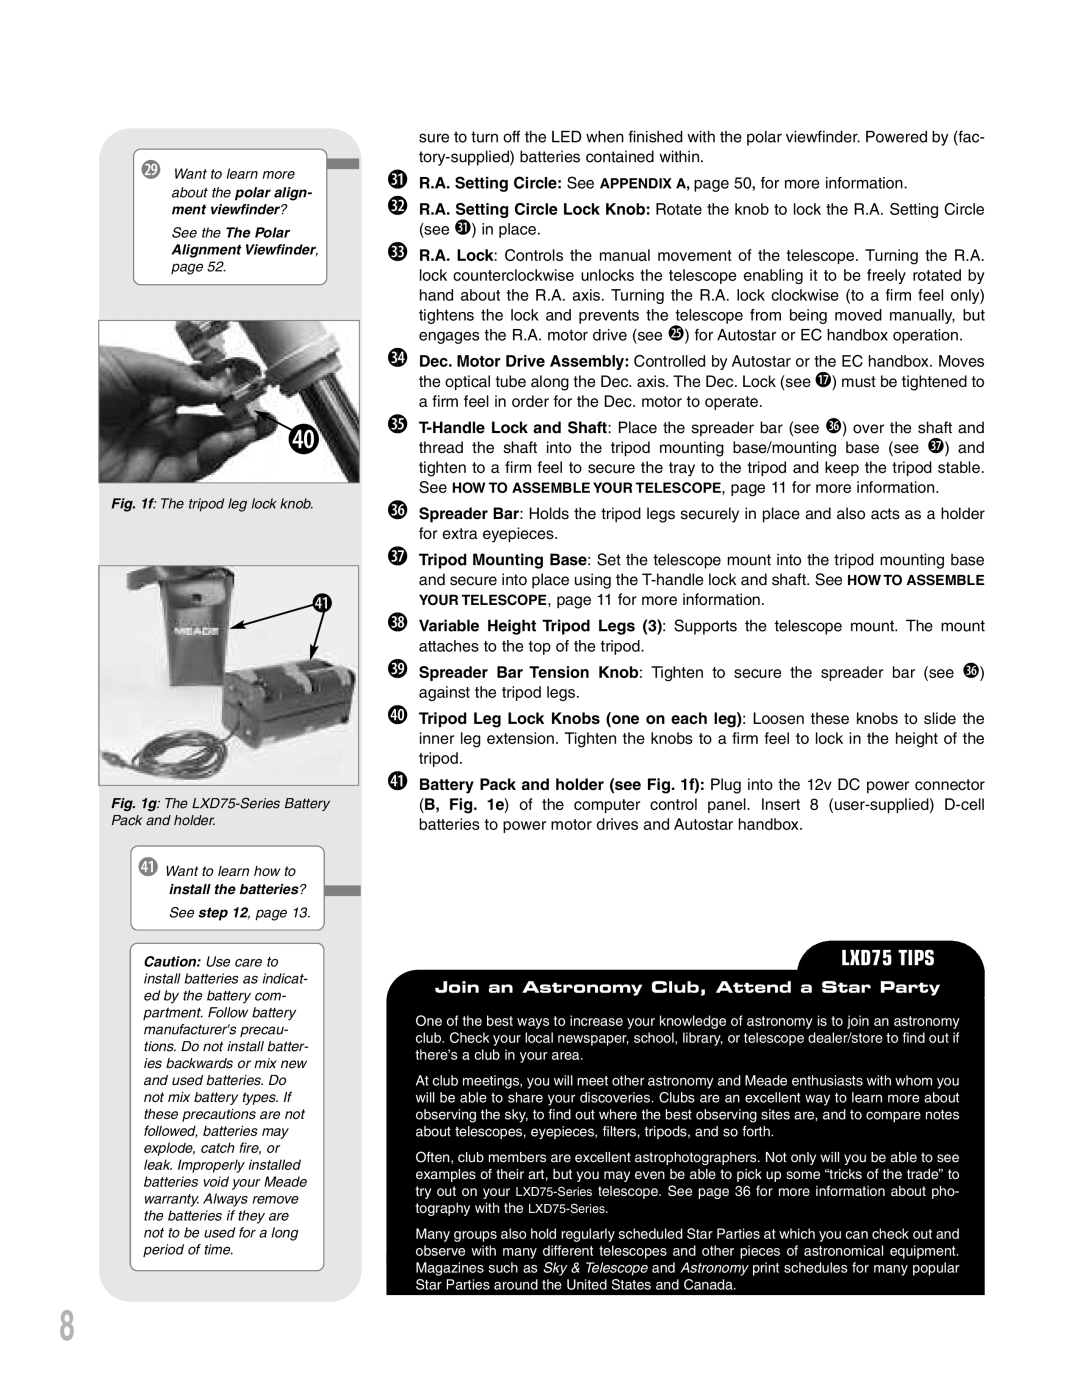 Meade instruction manual LXD75 TIPS, Join an Astronomy Club, Attend a Star Party 